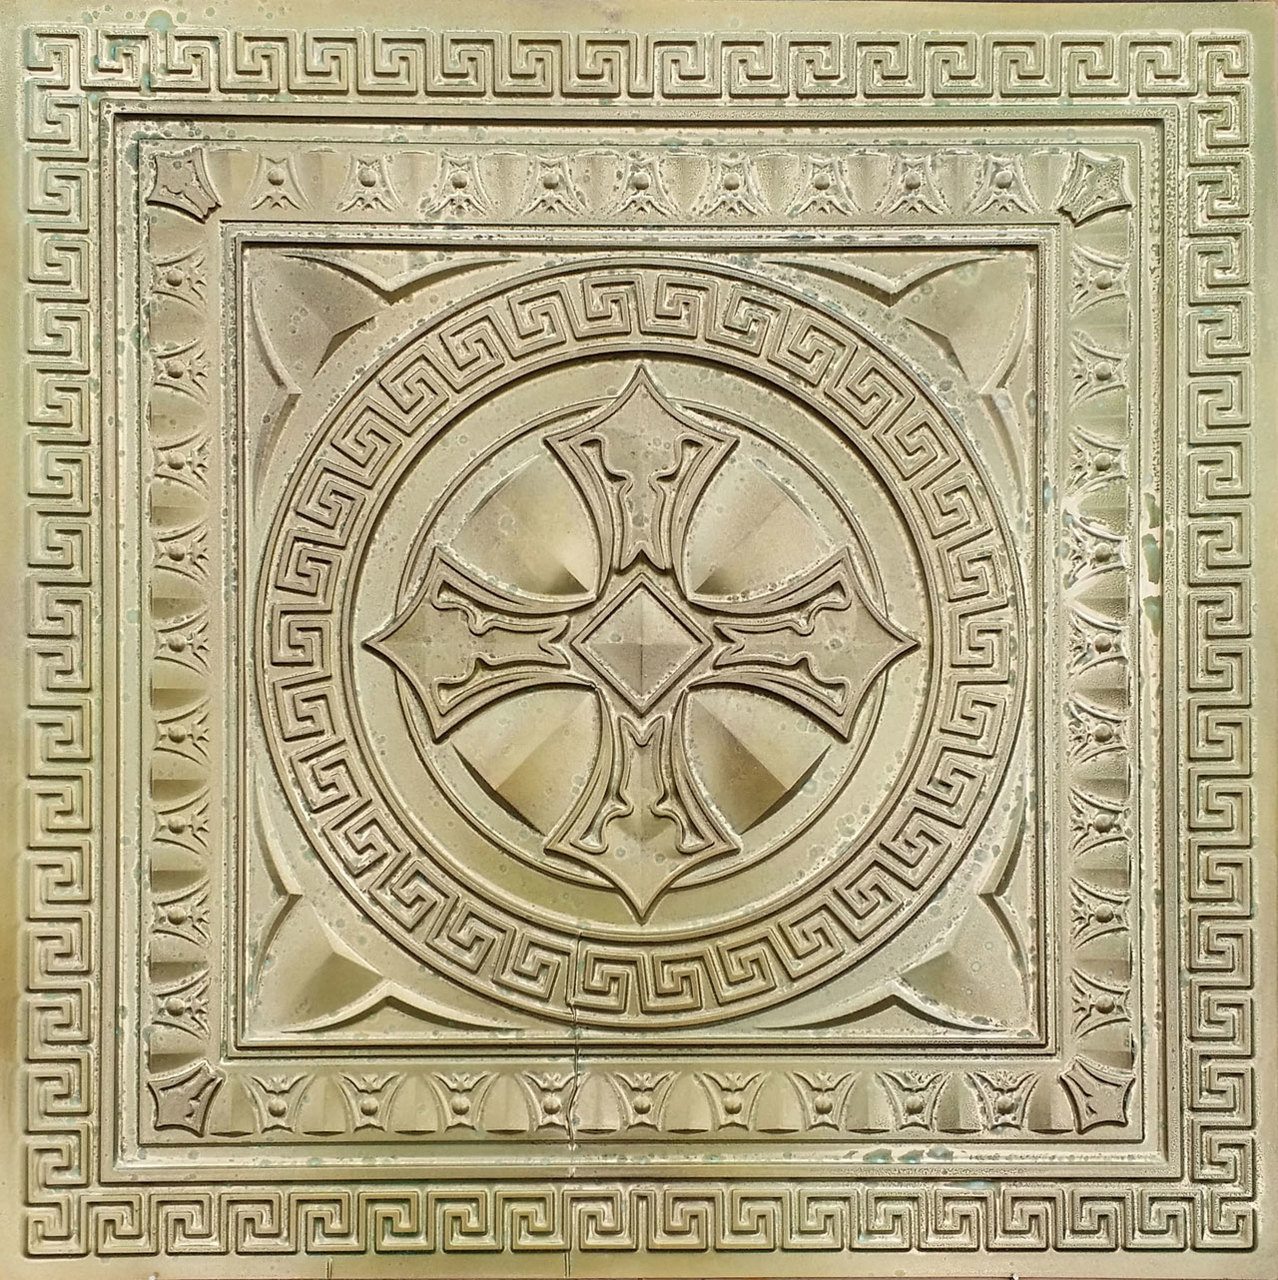 Antique Copper Ceiling Tile with egg and dart design and shield in the middle used as a flooring prop.